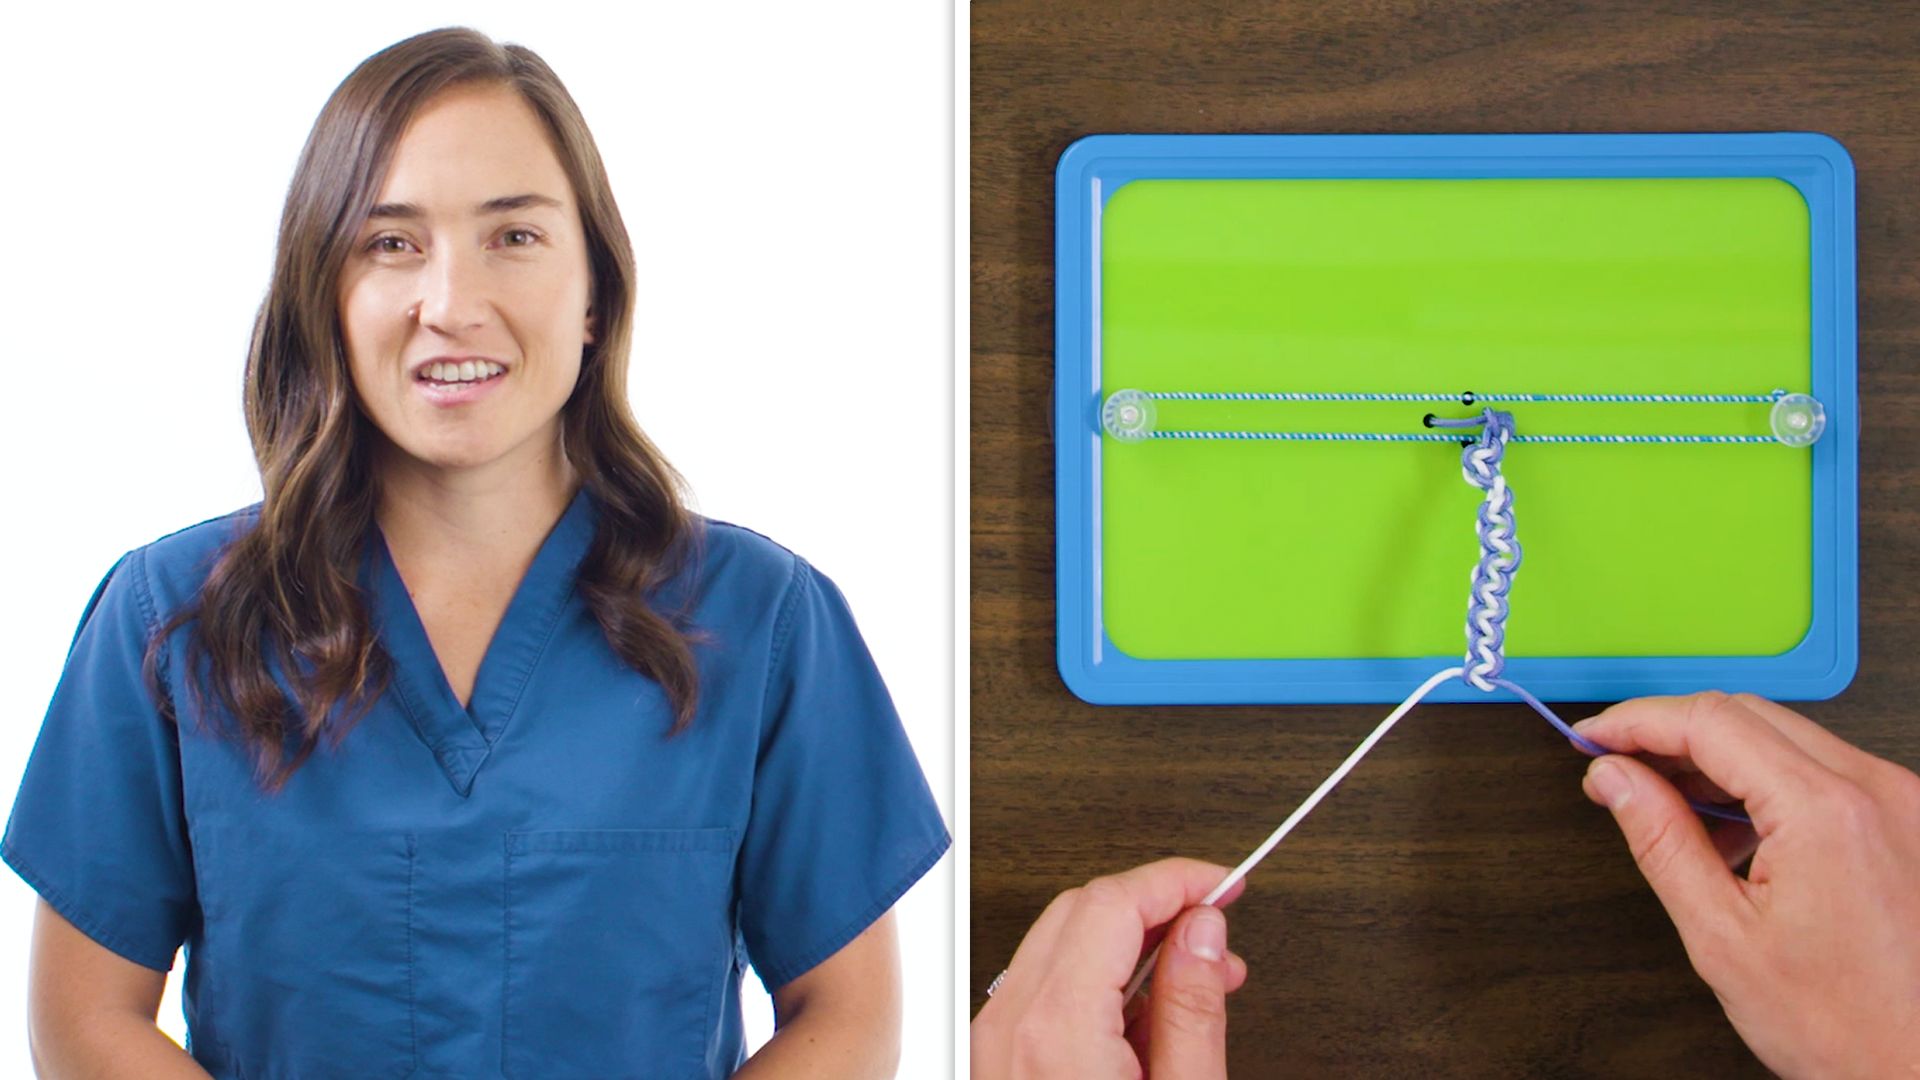 Watch Surgeon Explains How to Tie Surgical Knots, Good Form